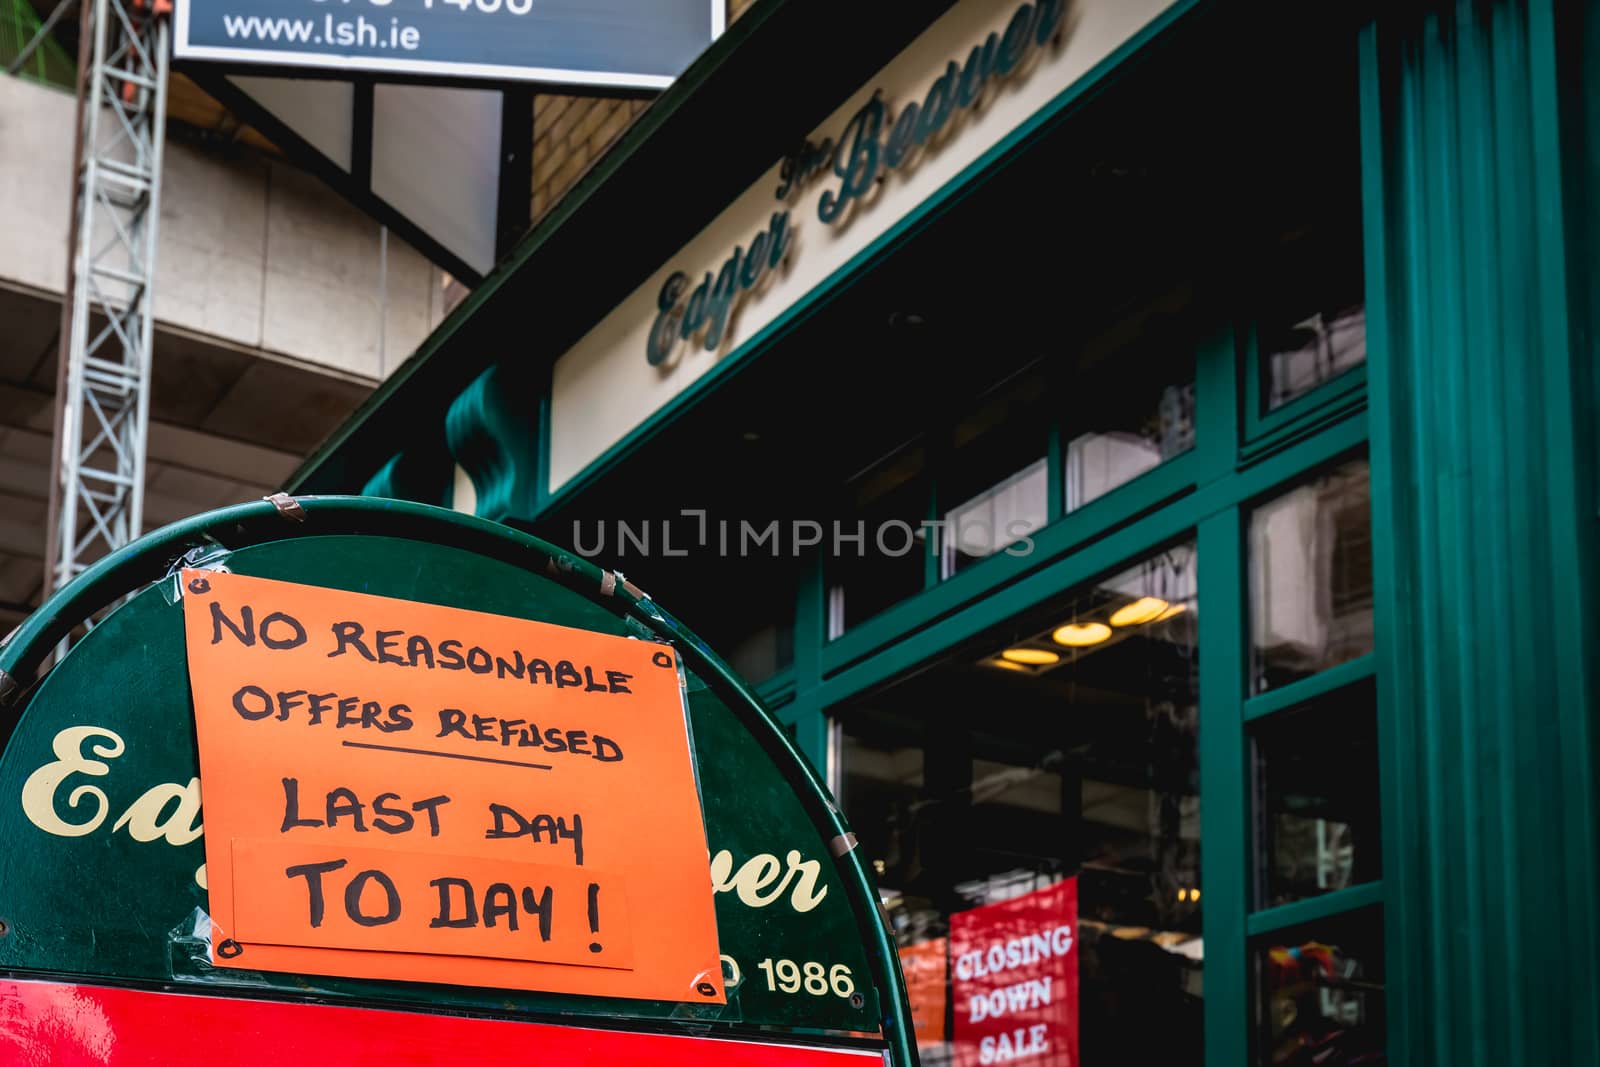 Dublin, Ireland - February 16, 2019: No reasonable offers refused - Last day to day - on a street sign outside a city center store on a winter day